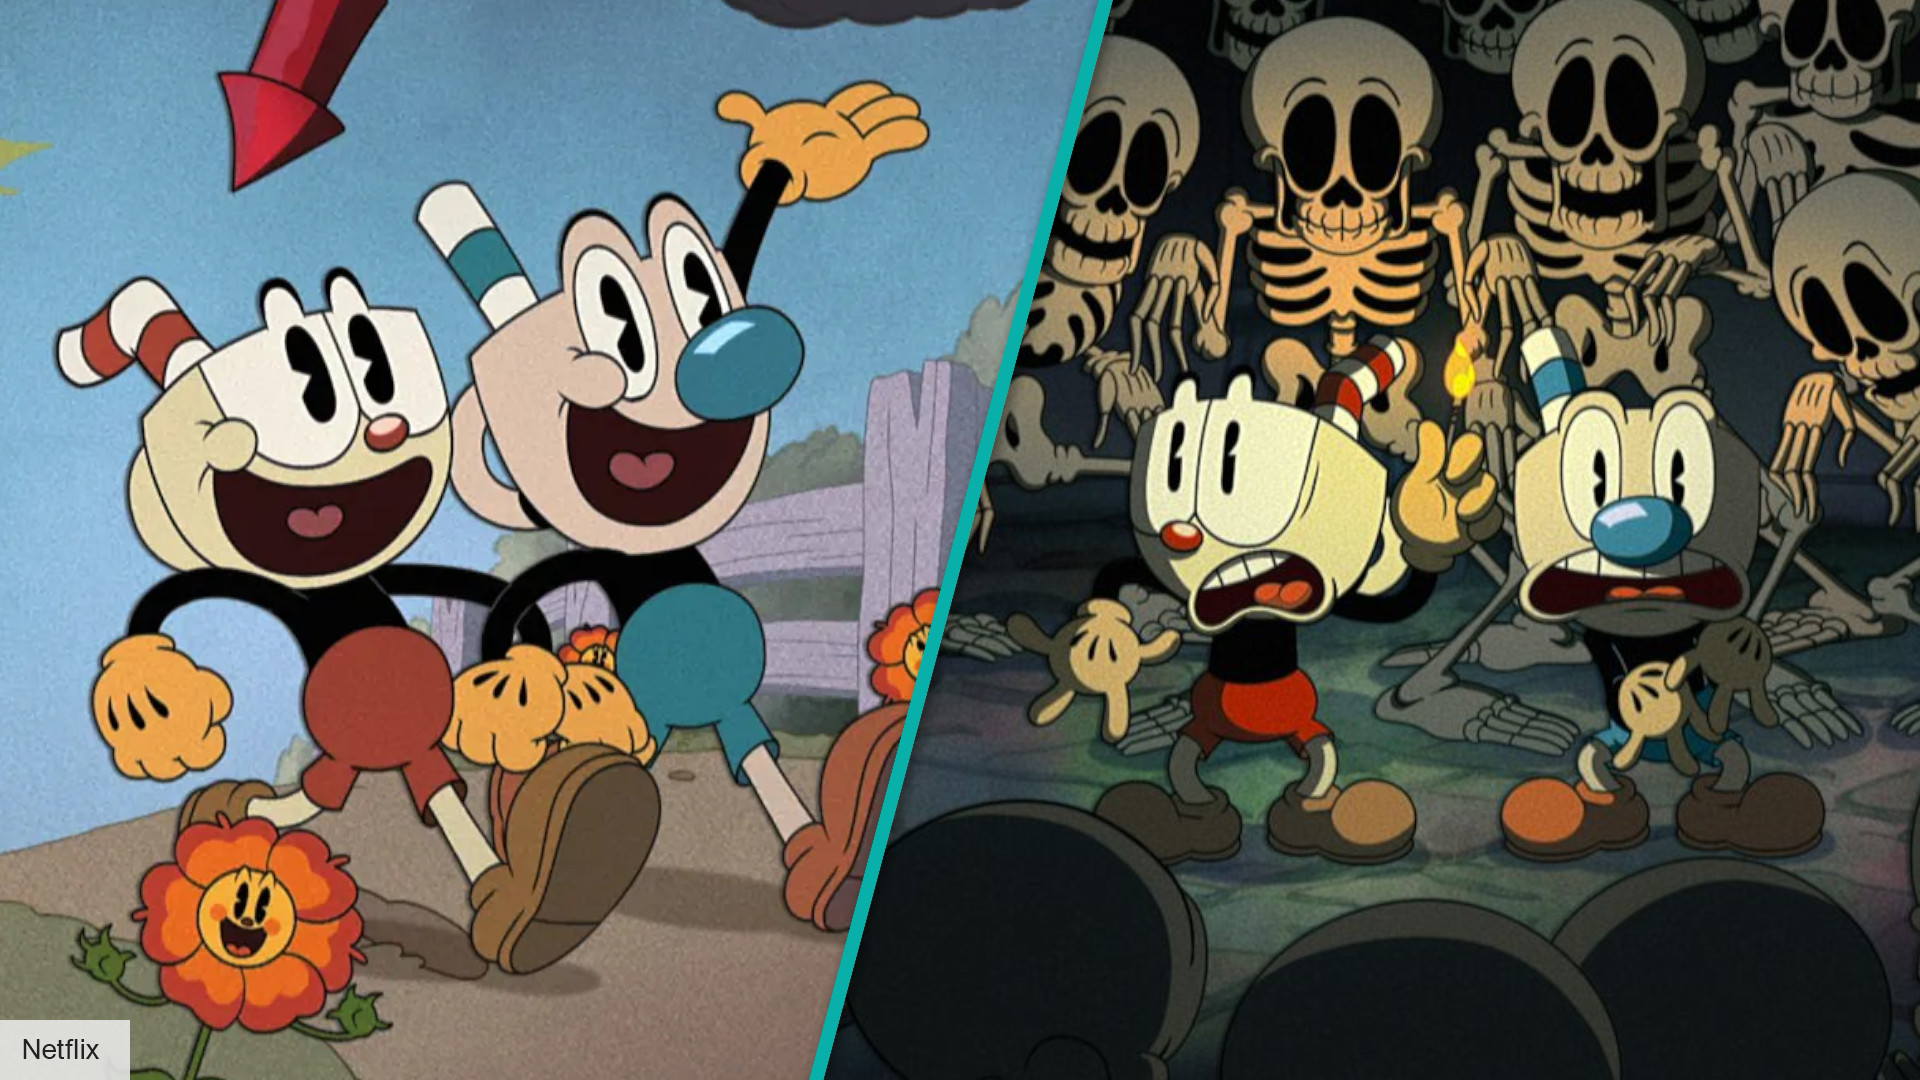 When Will The Cuphead Show Season 2 Be Released? Has It Been Cancelled or  Renewed? — New Magazin Research, by Newmagazinresearch